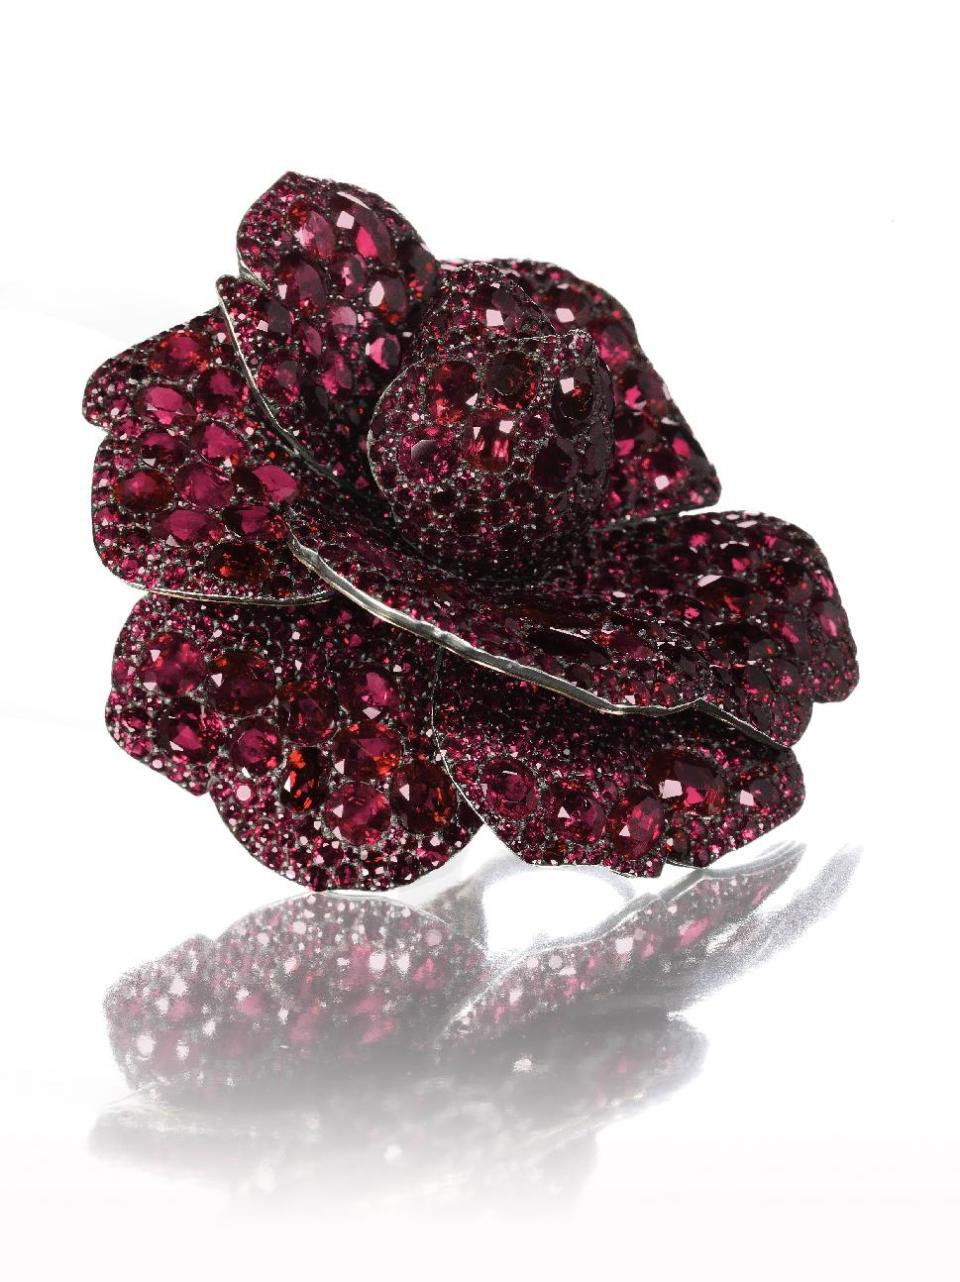 A ruby and diamond Camellia flower brooch, by JAR Created for Mrs Lily Safra in 2003